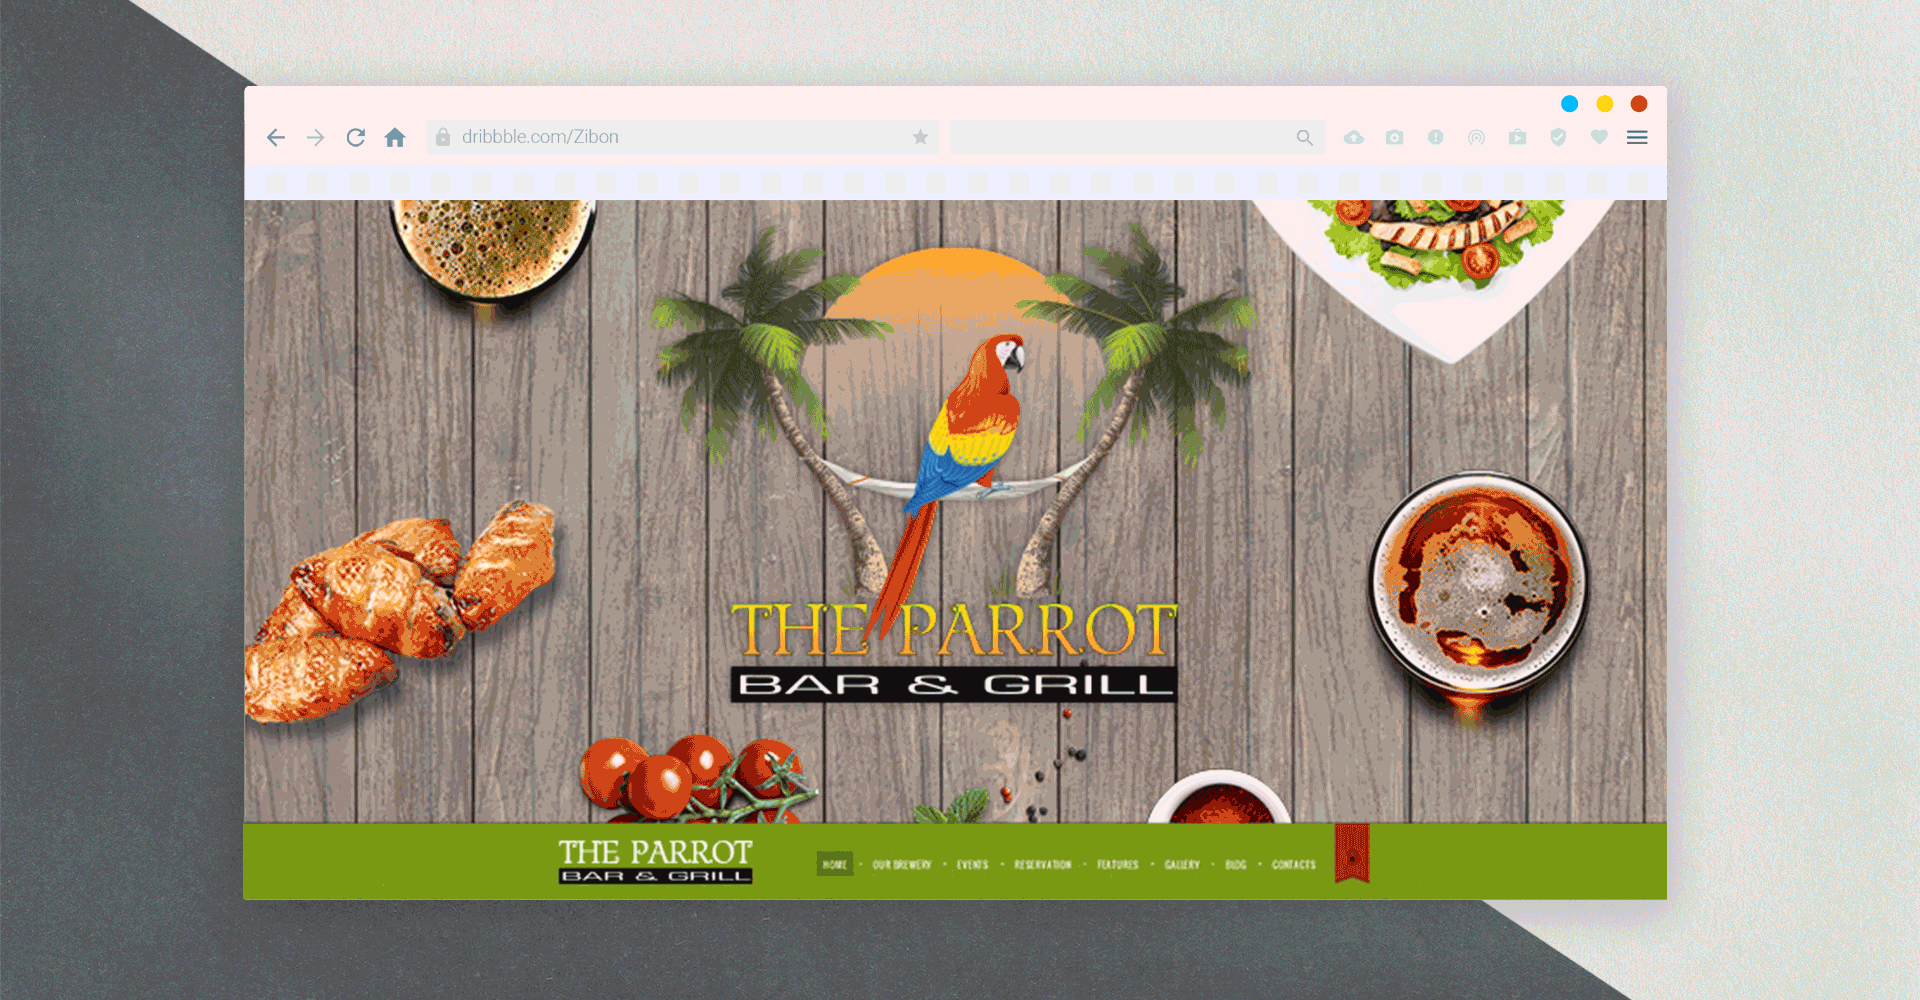 The Parrot Bar & Grill branding and site